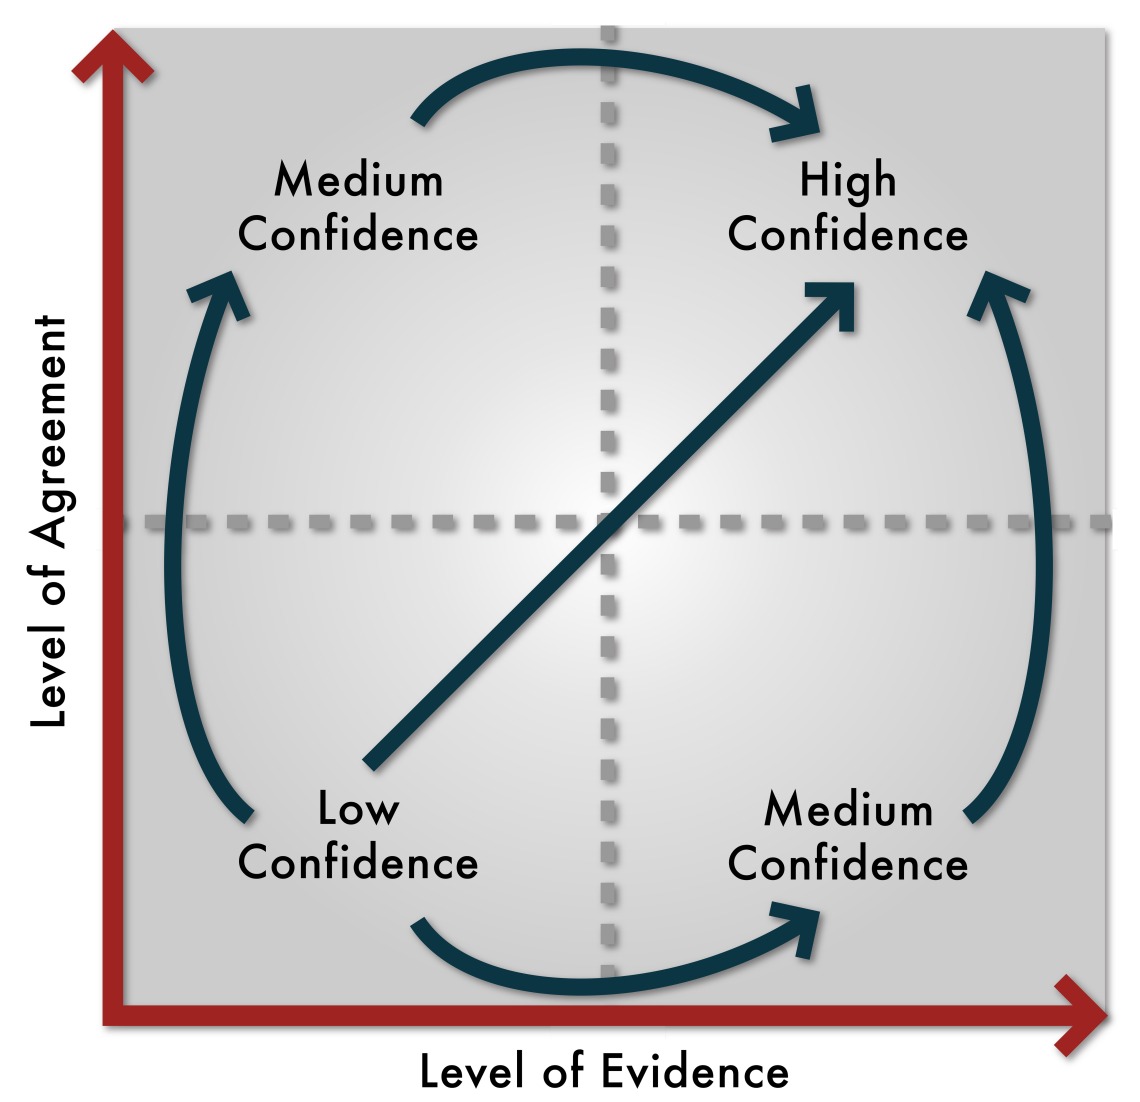 Increasing the level of evidence from, and agreement about, climate effects research, generates greater confidence in the research findings.